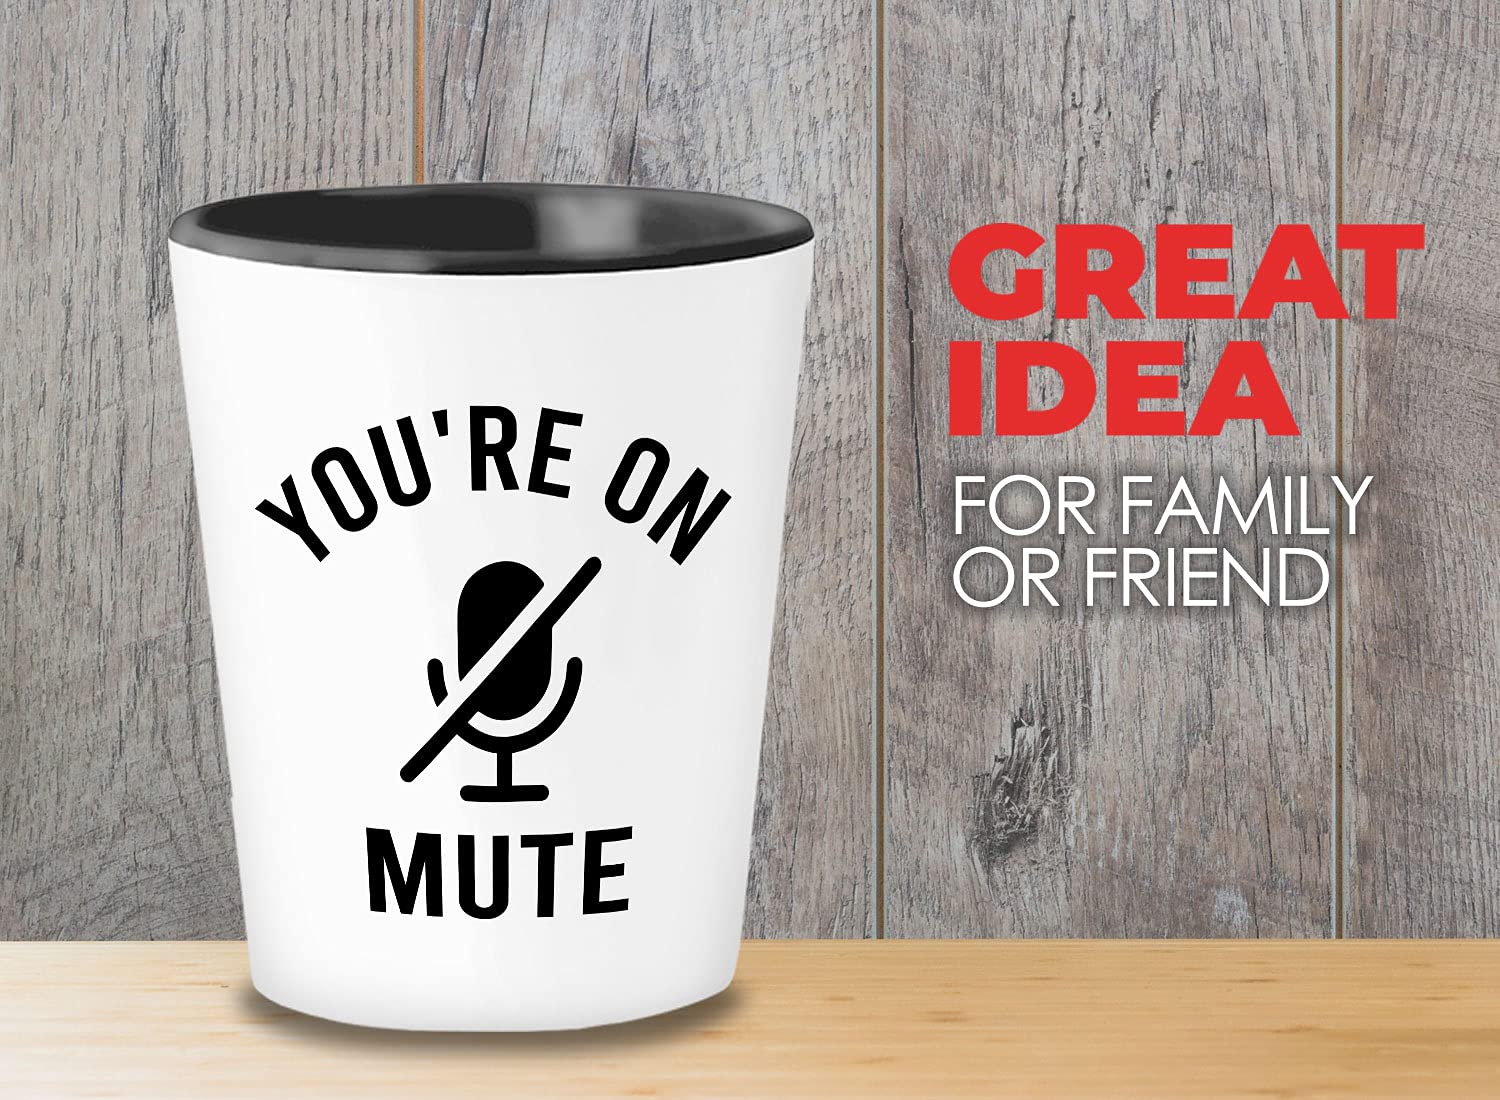 Sarcastic Shot Glass 1.5oz White - You're on Mute - Funny Zoom Work from Home Online Learning Video Call Meeting for Educator Learner Worker